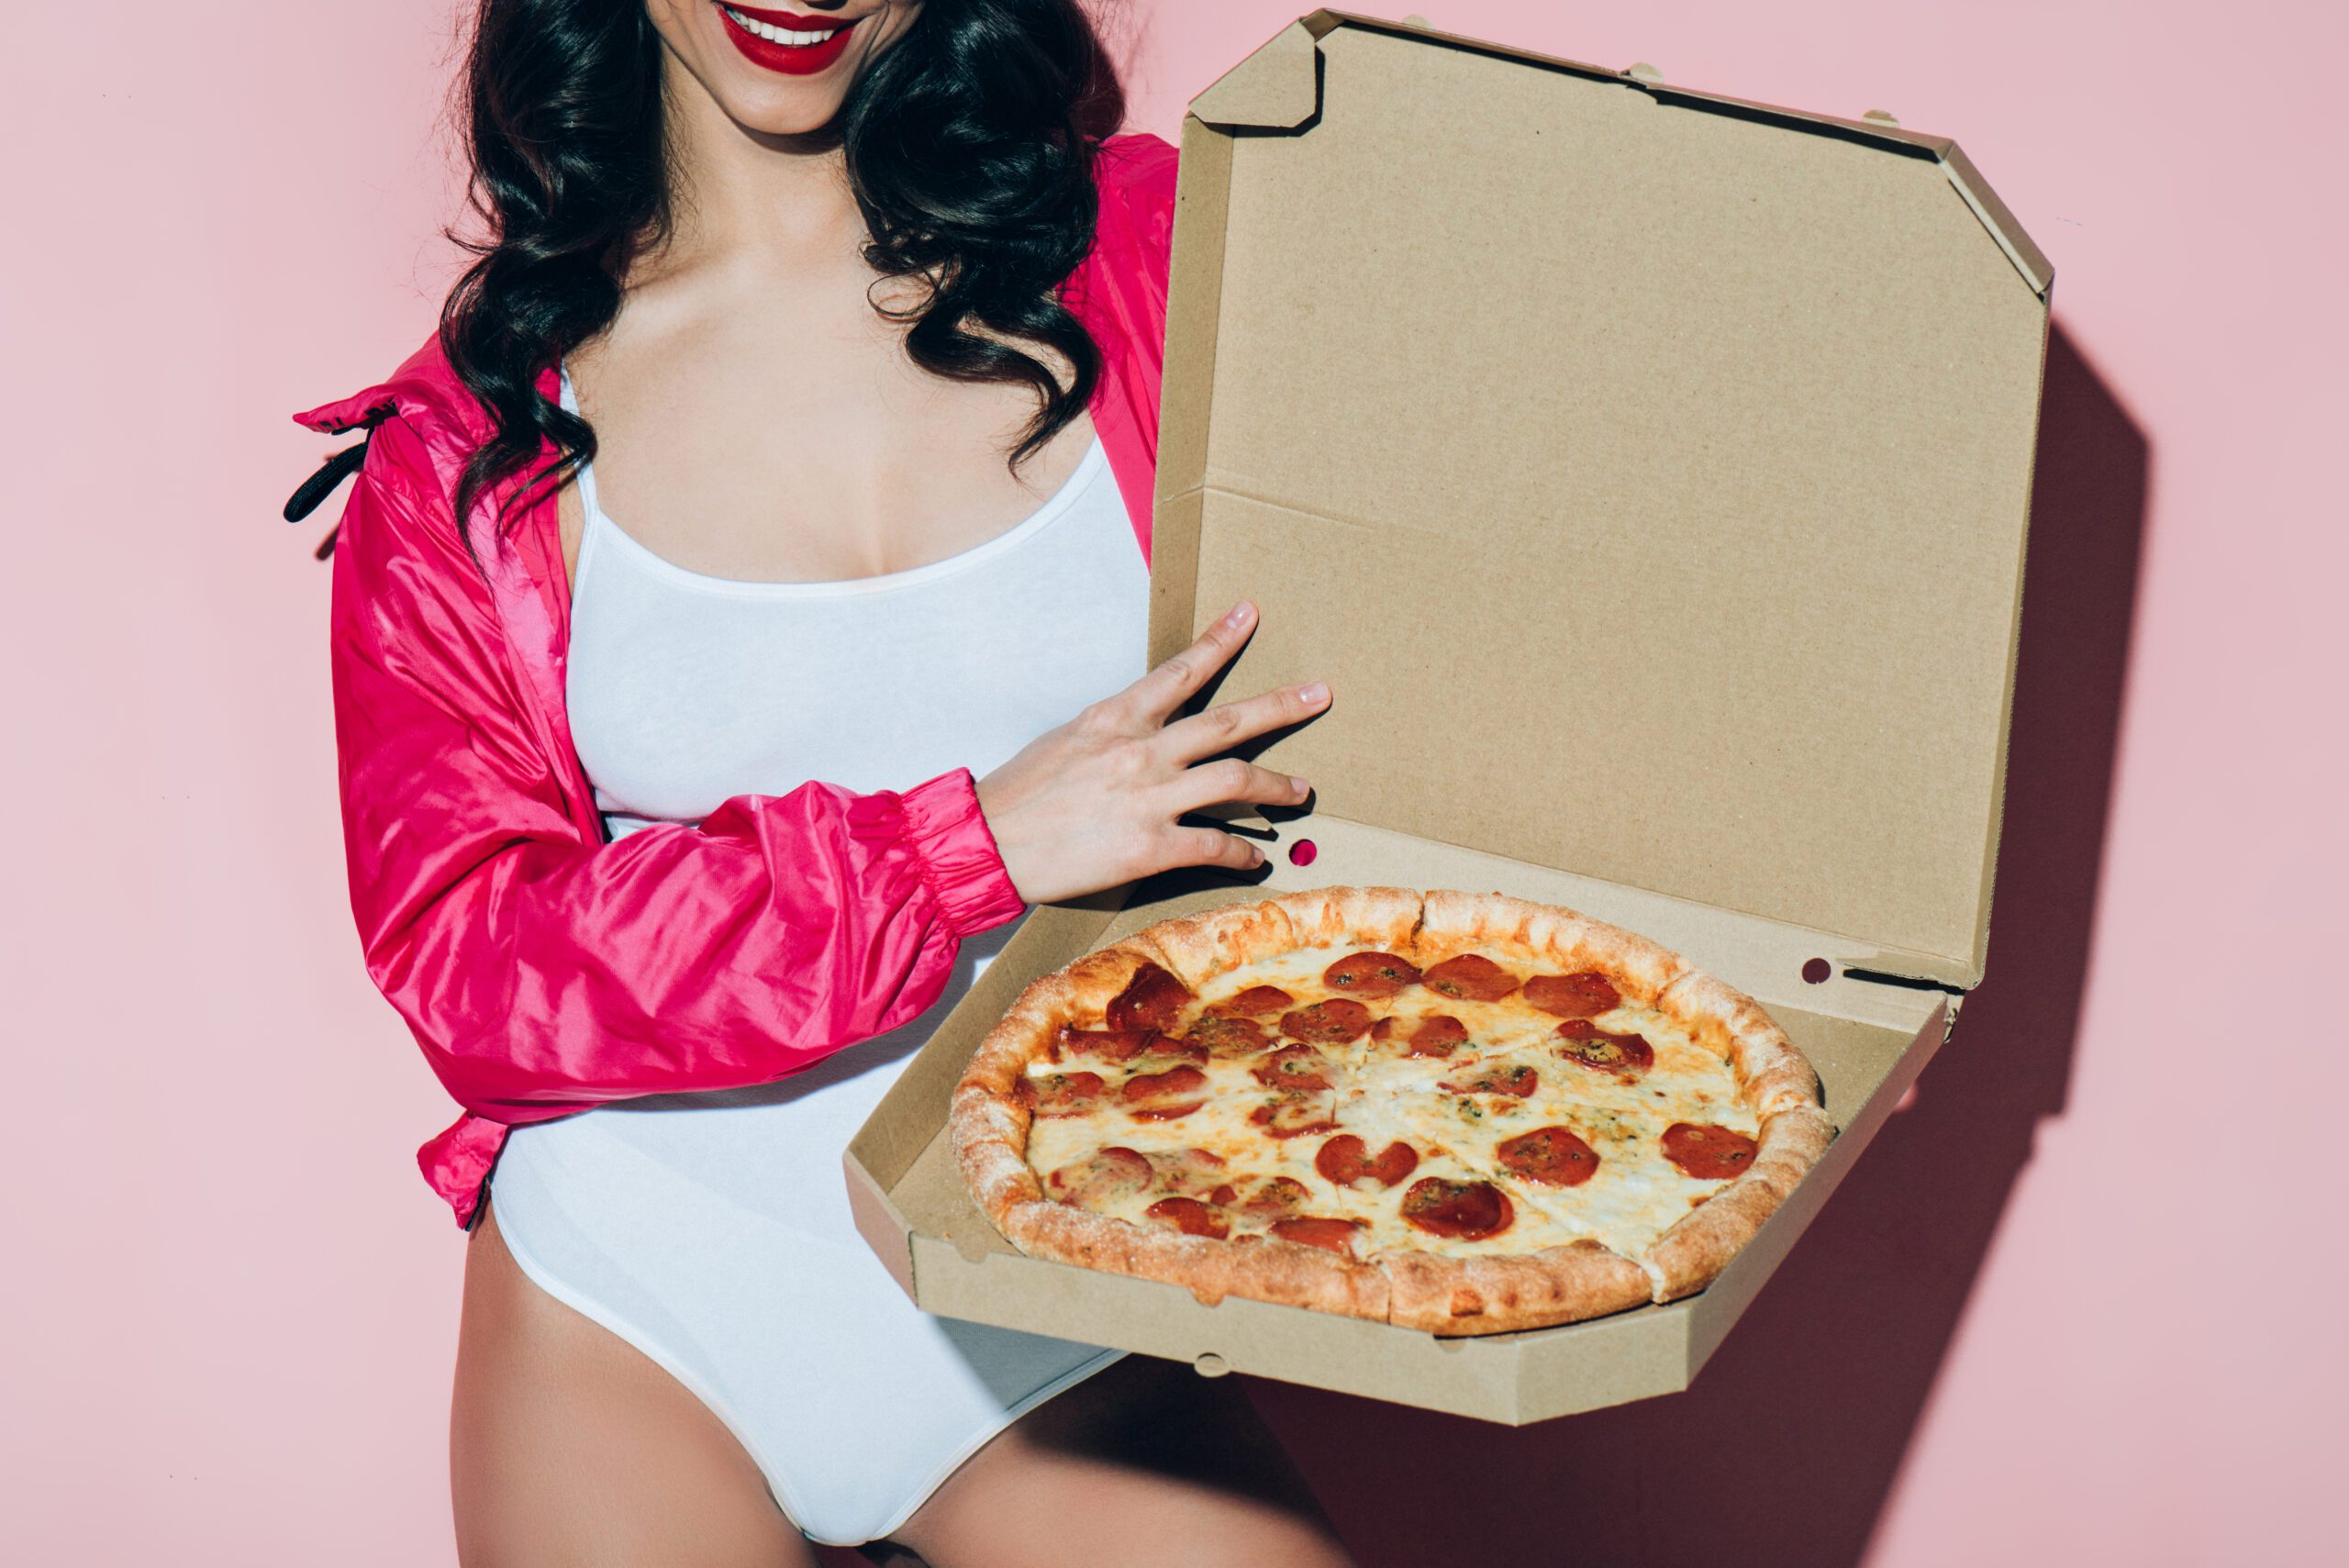 SEXY PIZZA DELIVERY